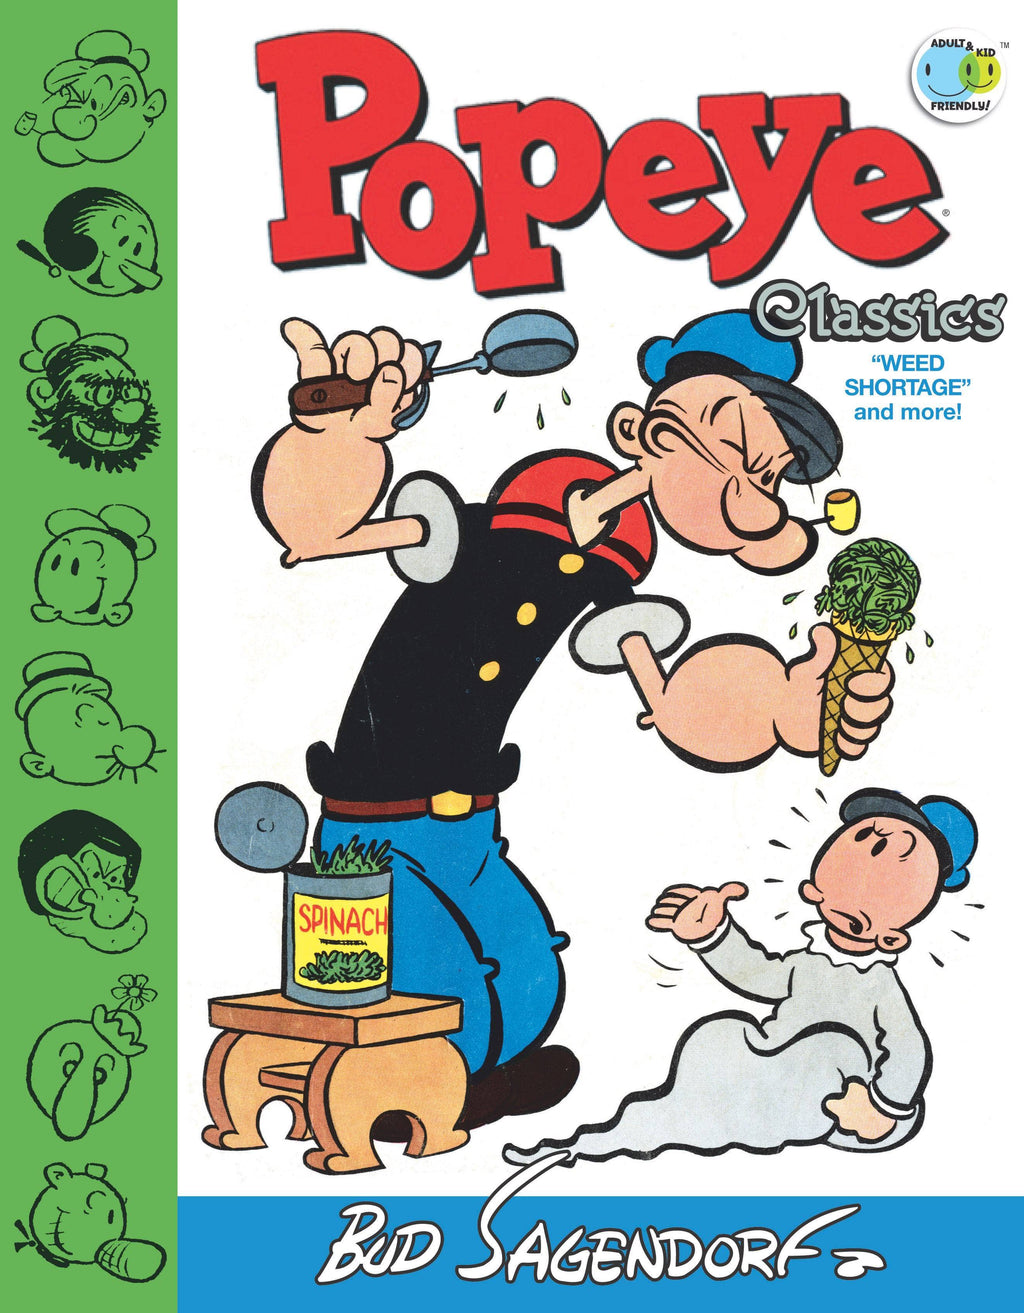 Speed Lines and other cartoon action effects -- by Popeye's Bud Sagendorf